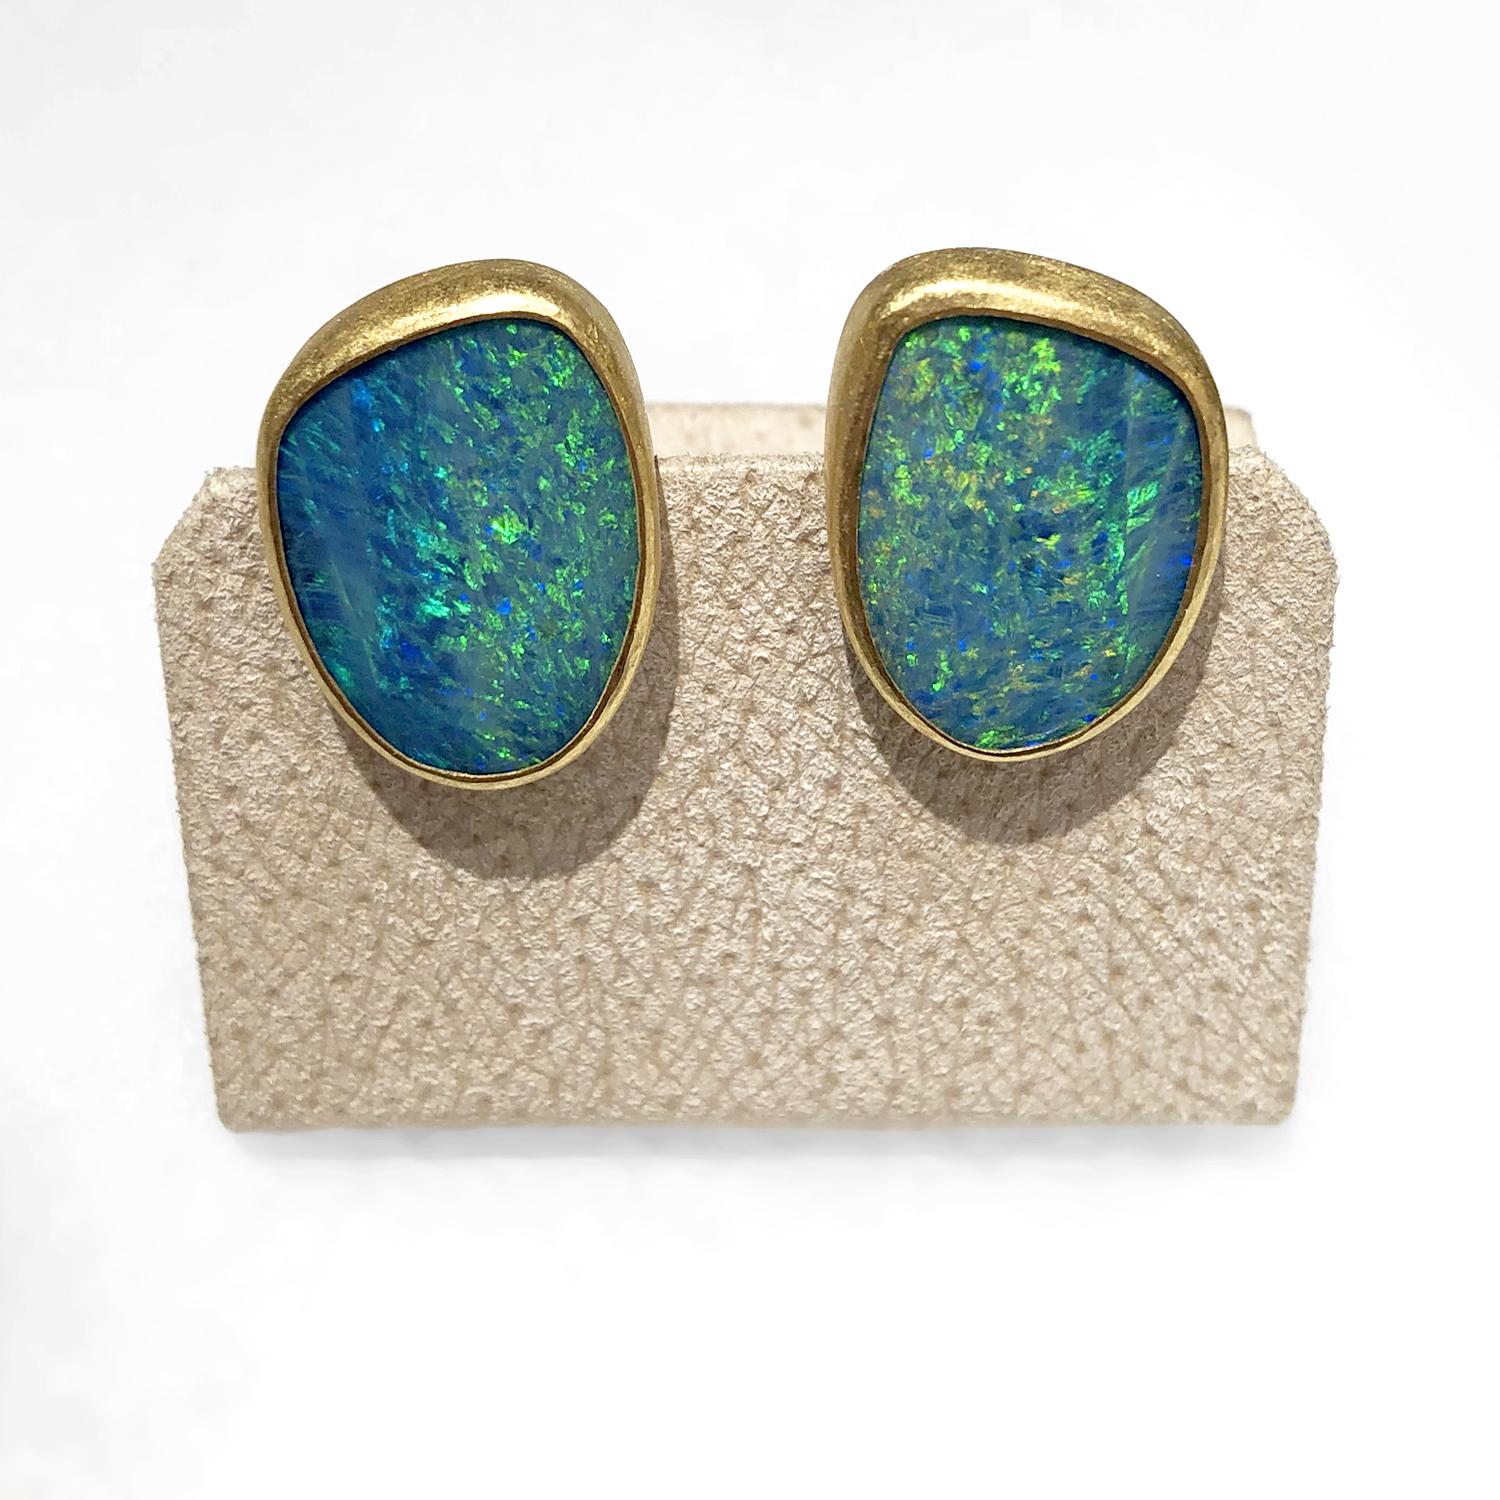 Artist Petra Class One-of-a-Kind Opal Doublet Gold Large Clip Stud Earrings